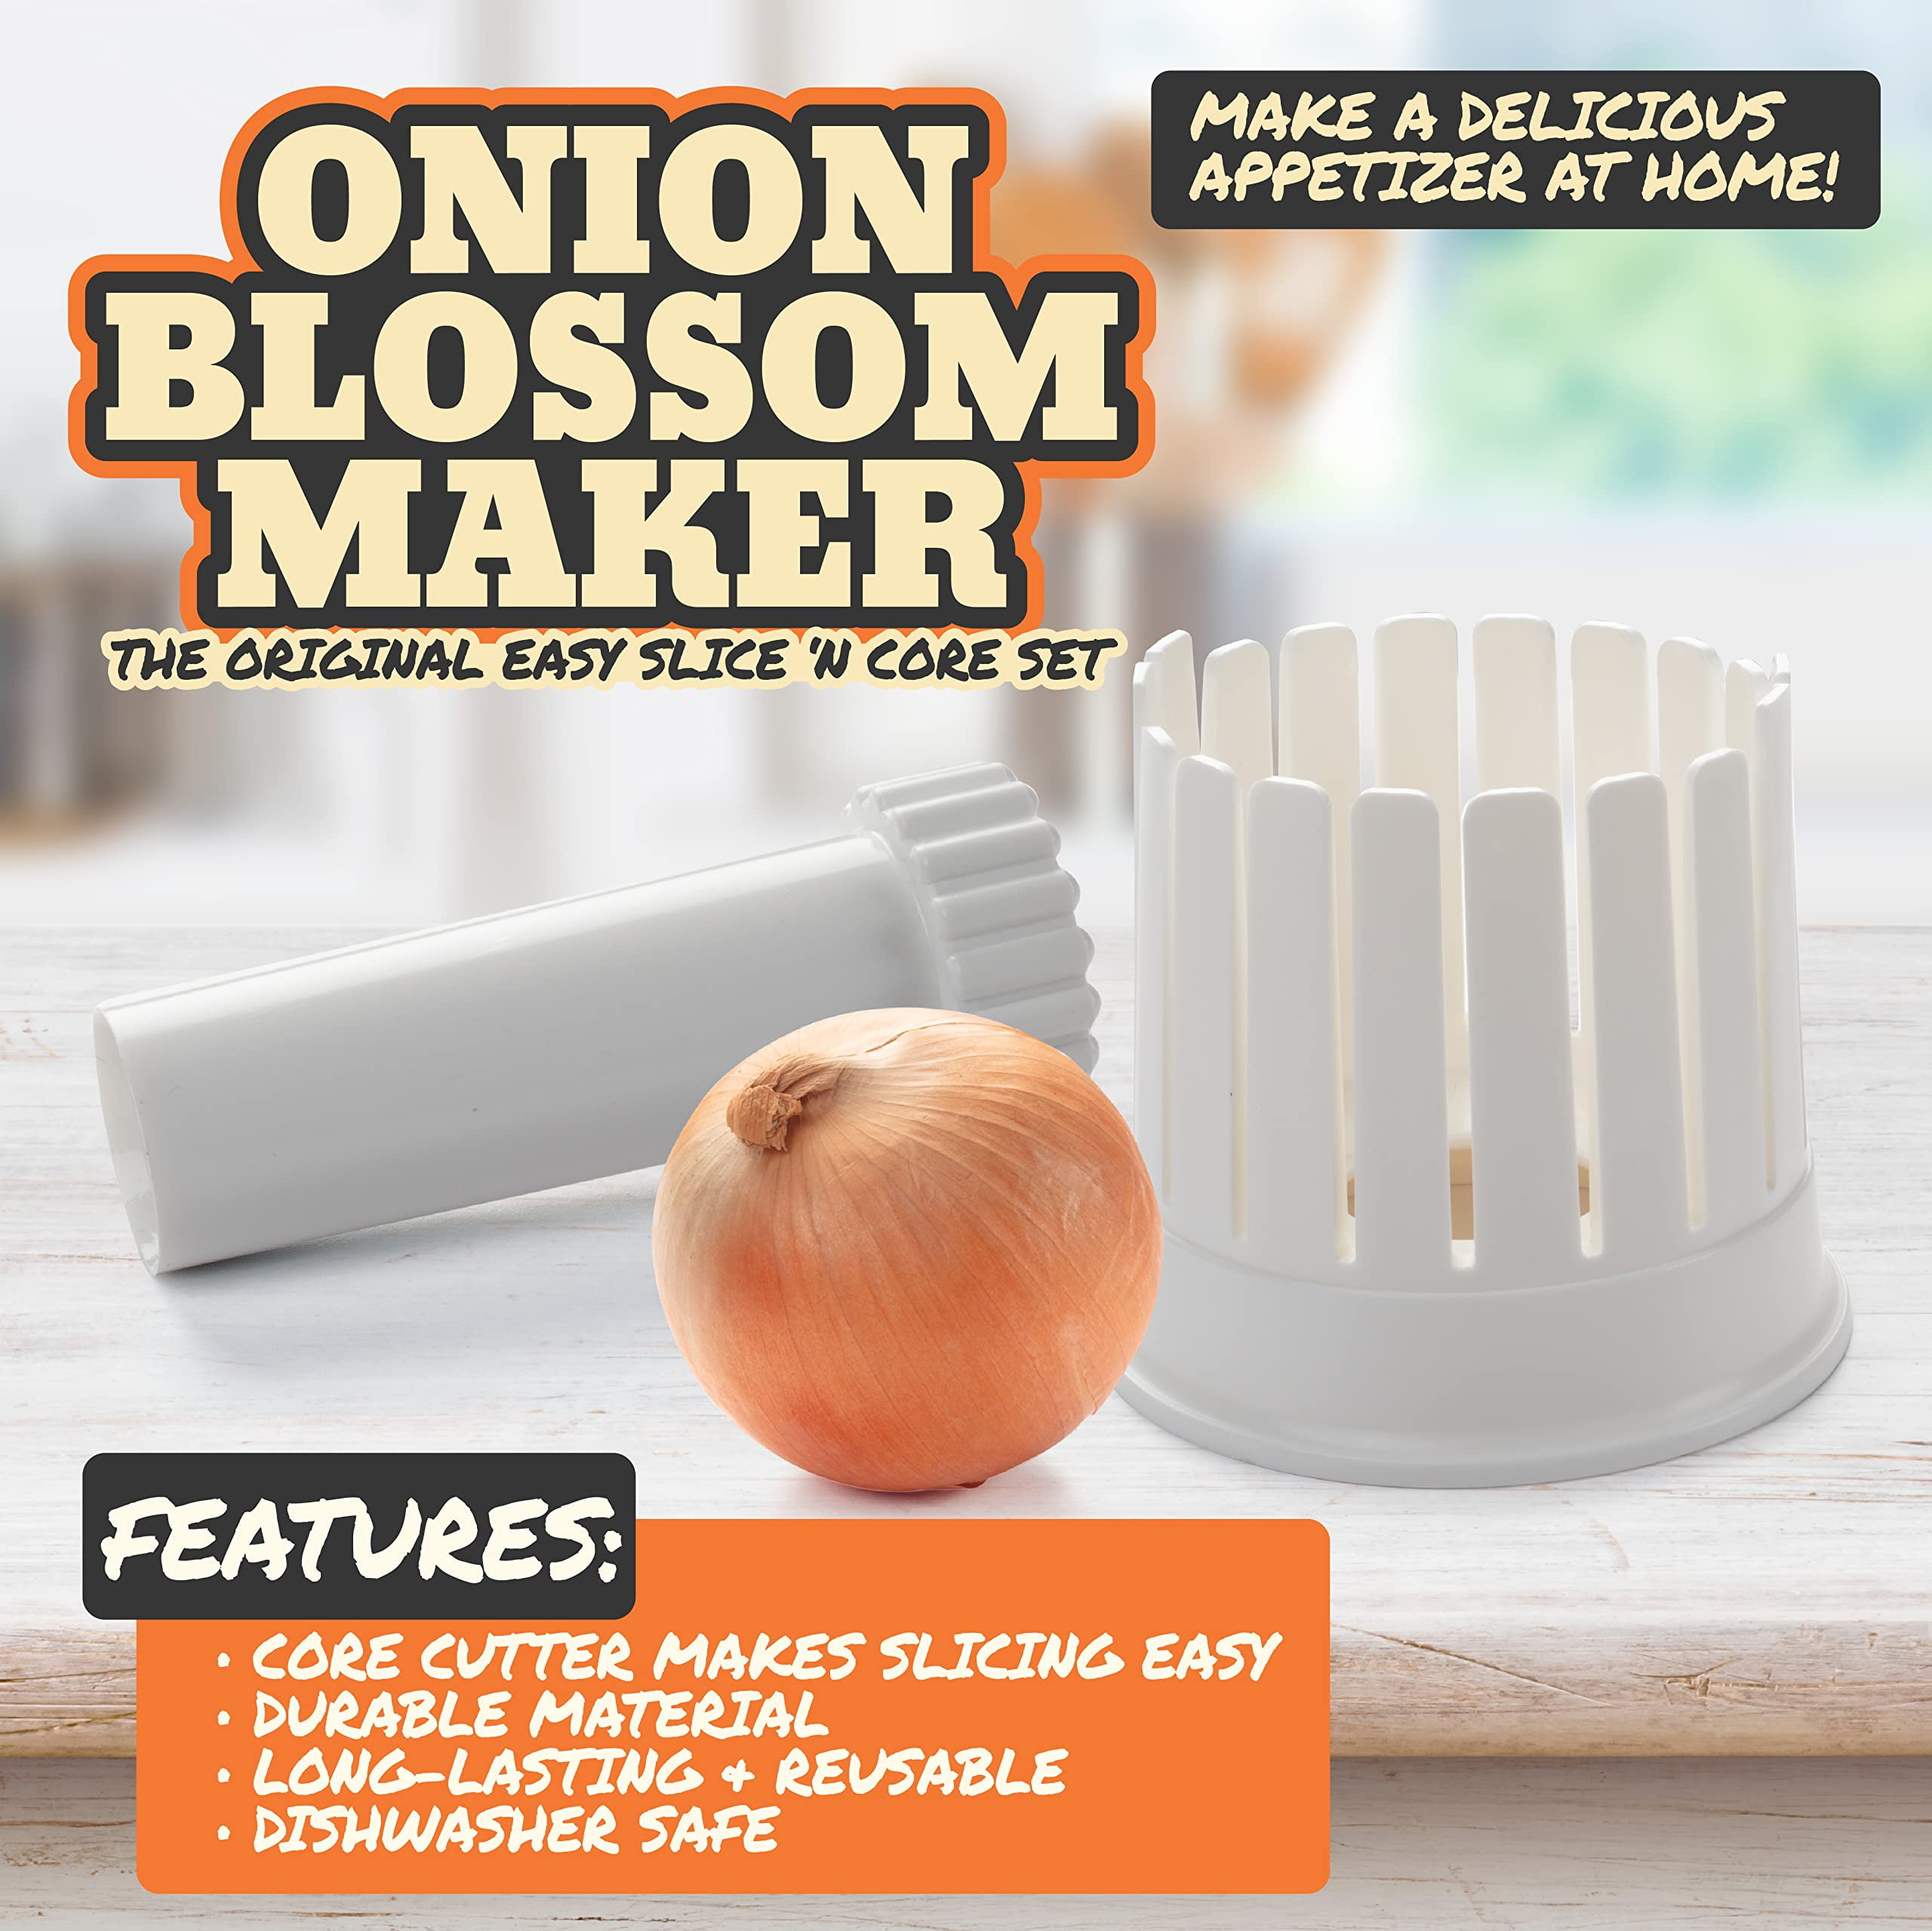 Great American Steakhouse Onion Machine Blooming Onion Maker Seen On TV  97298020346